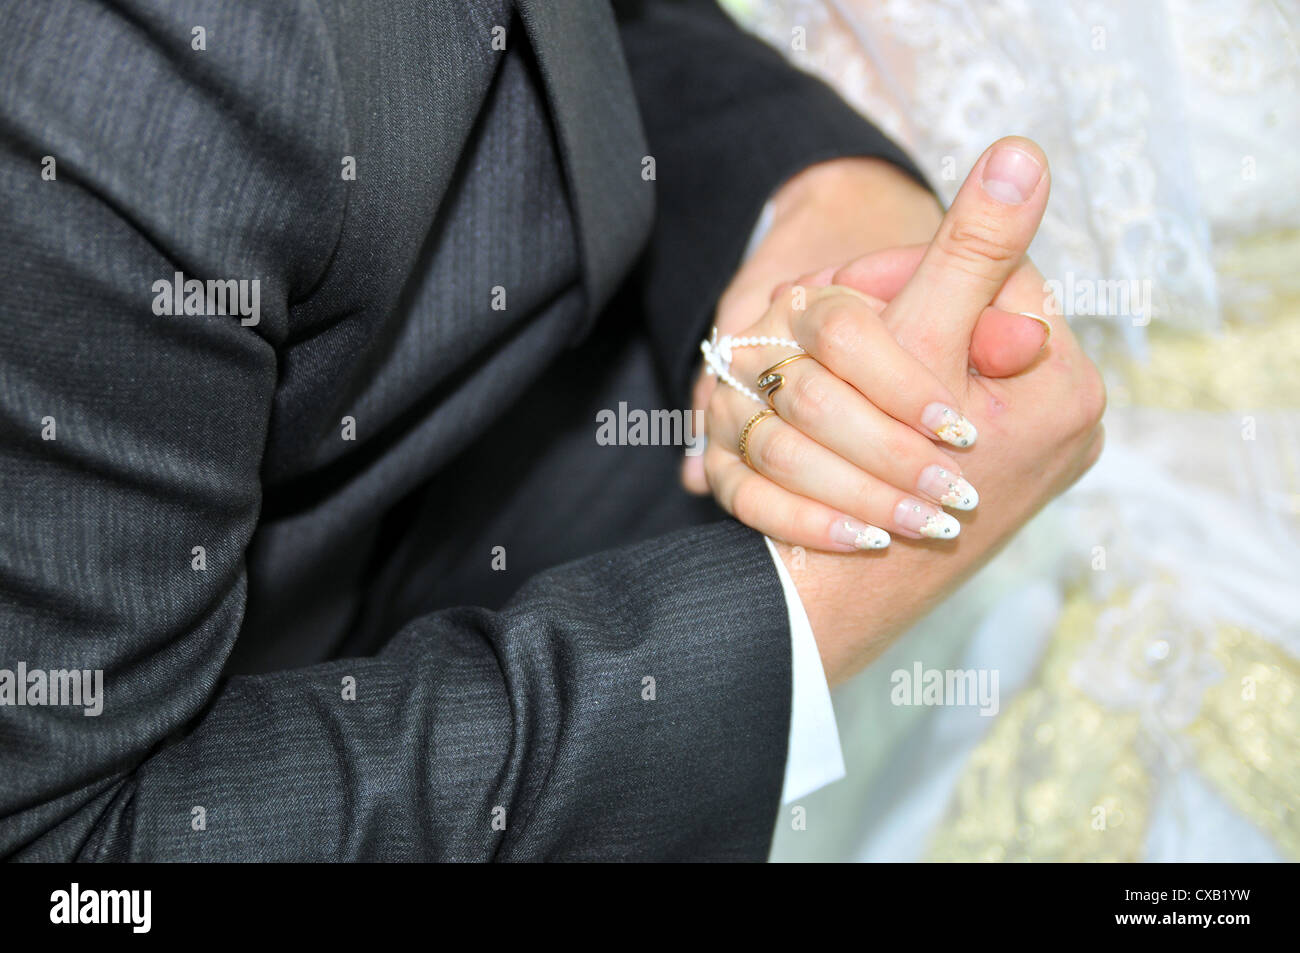 hands of newlyweds with a wedding ring and a bouquet of flowers Stock Photo